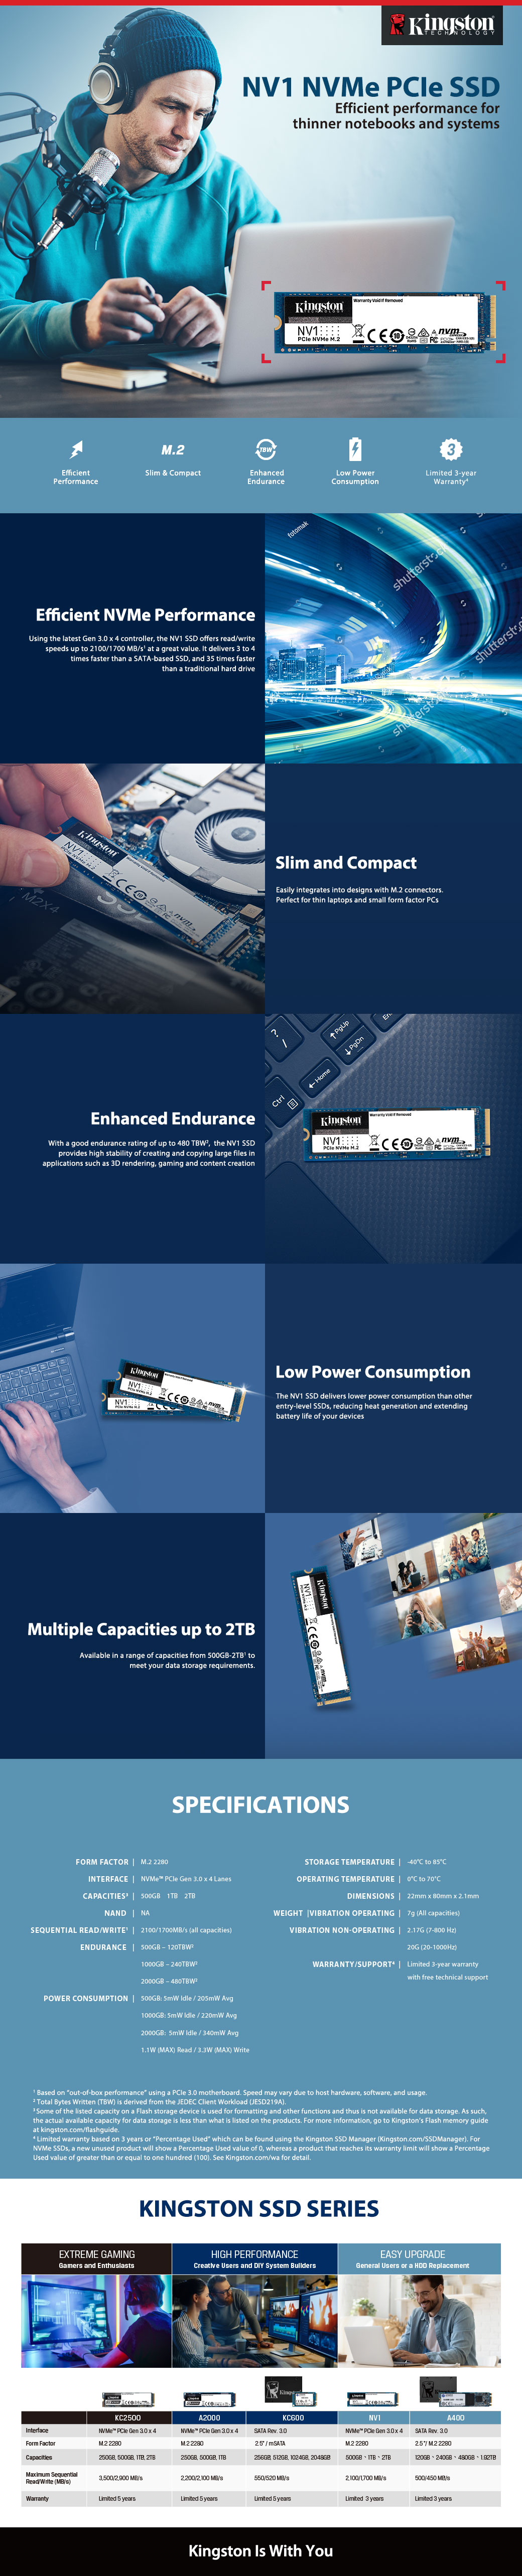 A large marketing image providing additional information about the product Kingston NV1 1TB NVMe M.2 SSD - Additional alt info not provided